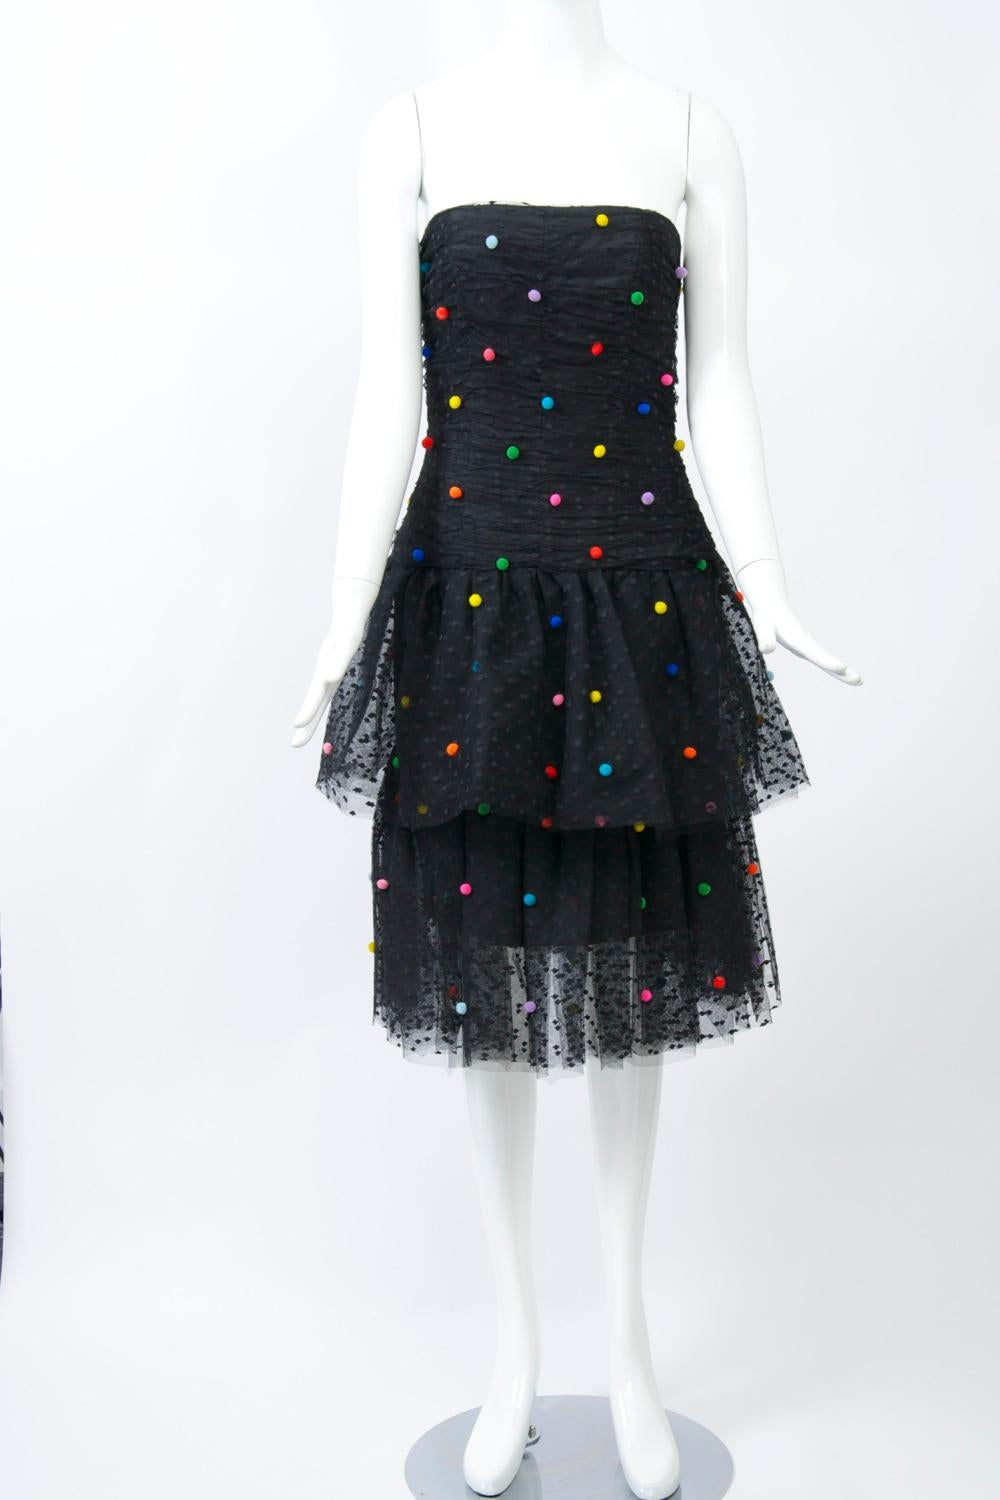 What fun! Victor Costa evening dress in dotted black net, the ruched bodice and tiered skirt decorated with multicolored mini pompoms. Long fitted torso, back zipper, lined with narrow, short underskirt. Approximate contemporary size 4-6.